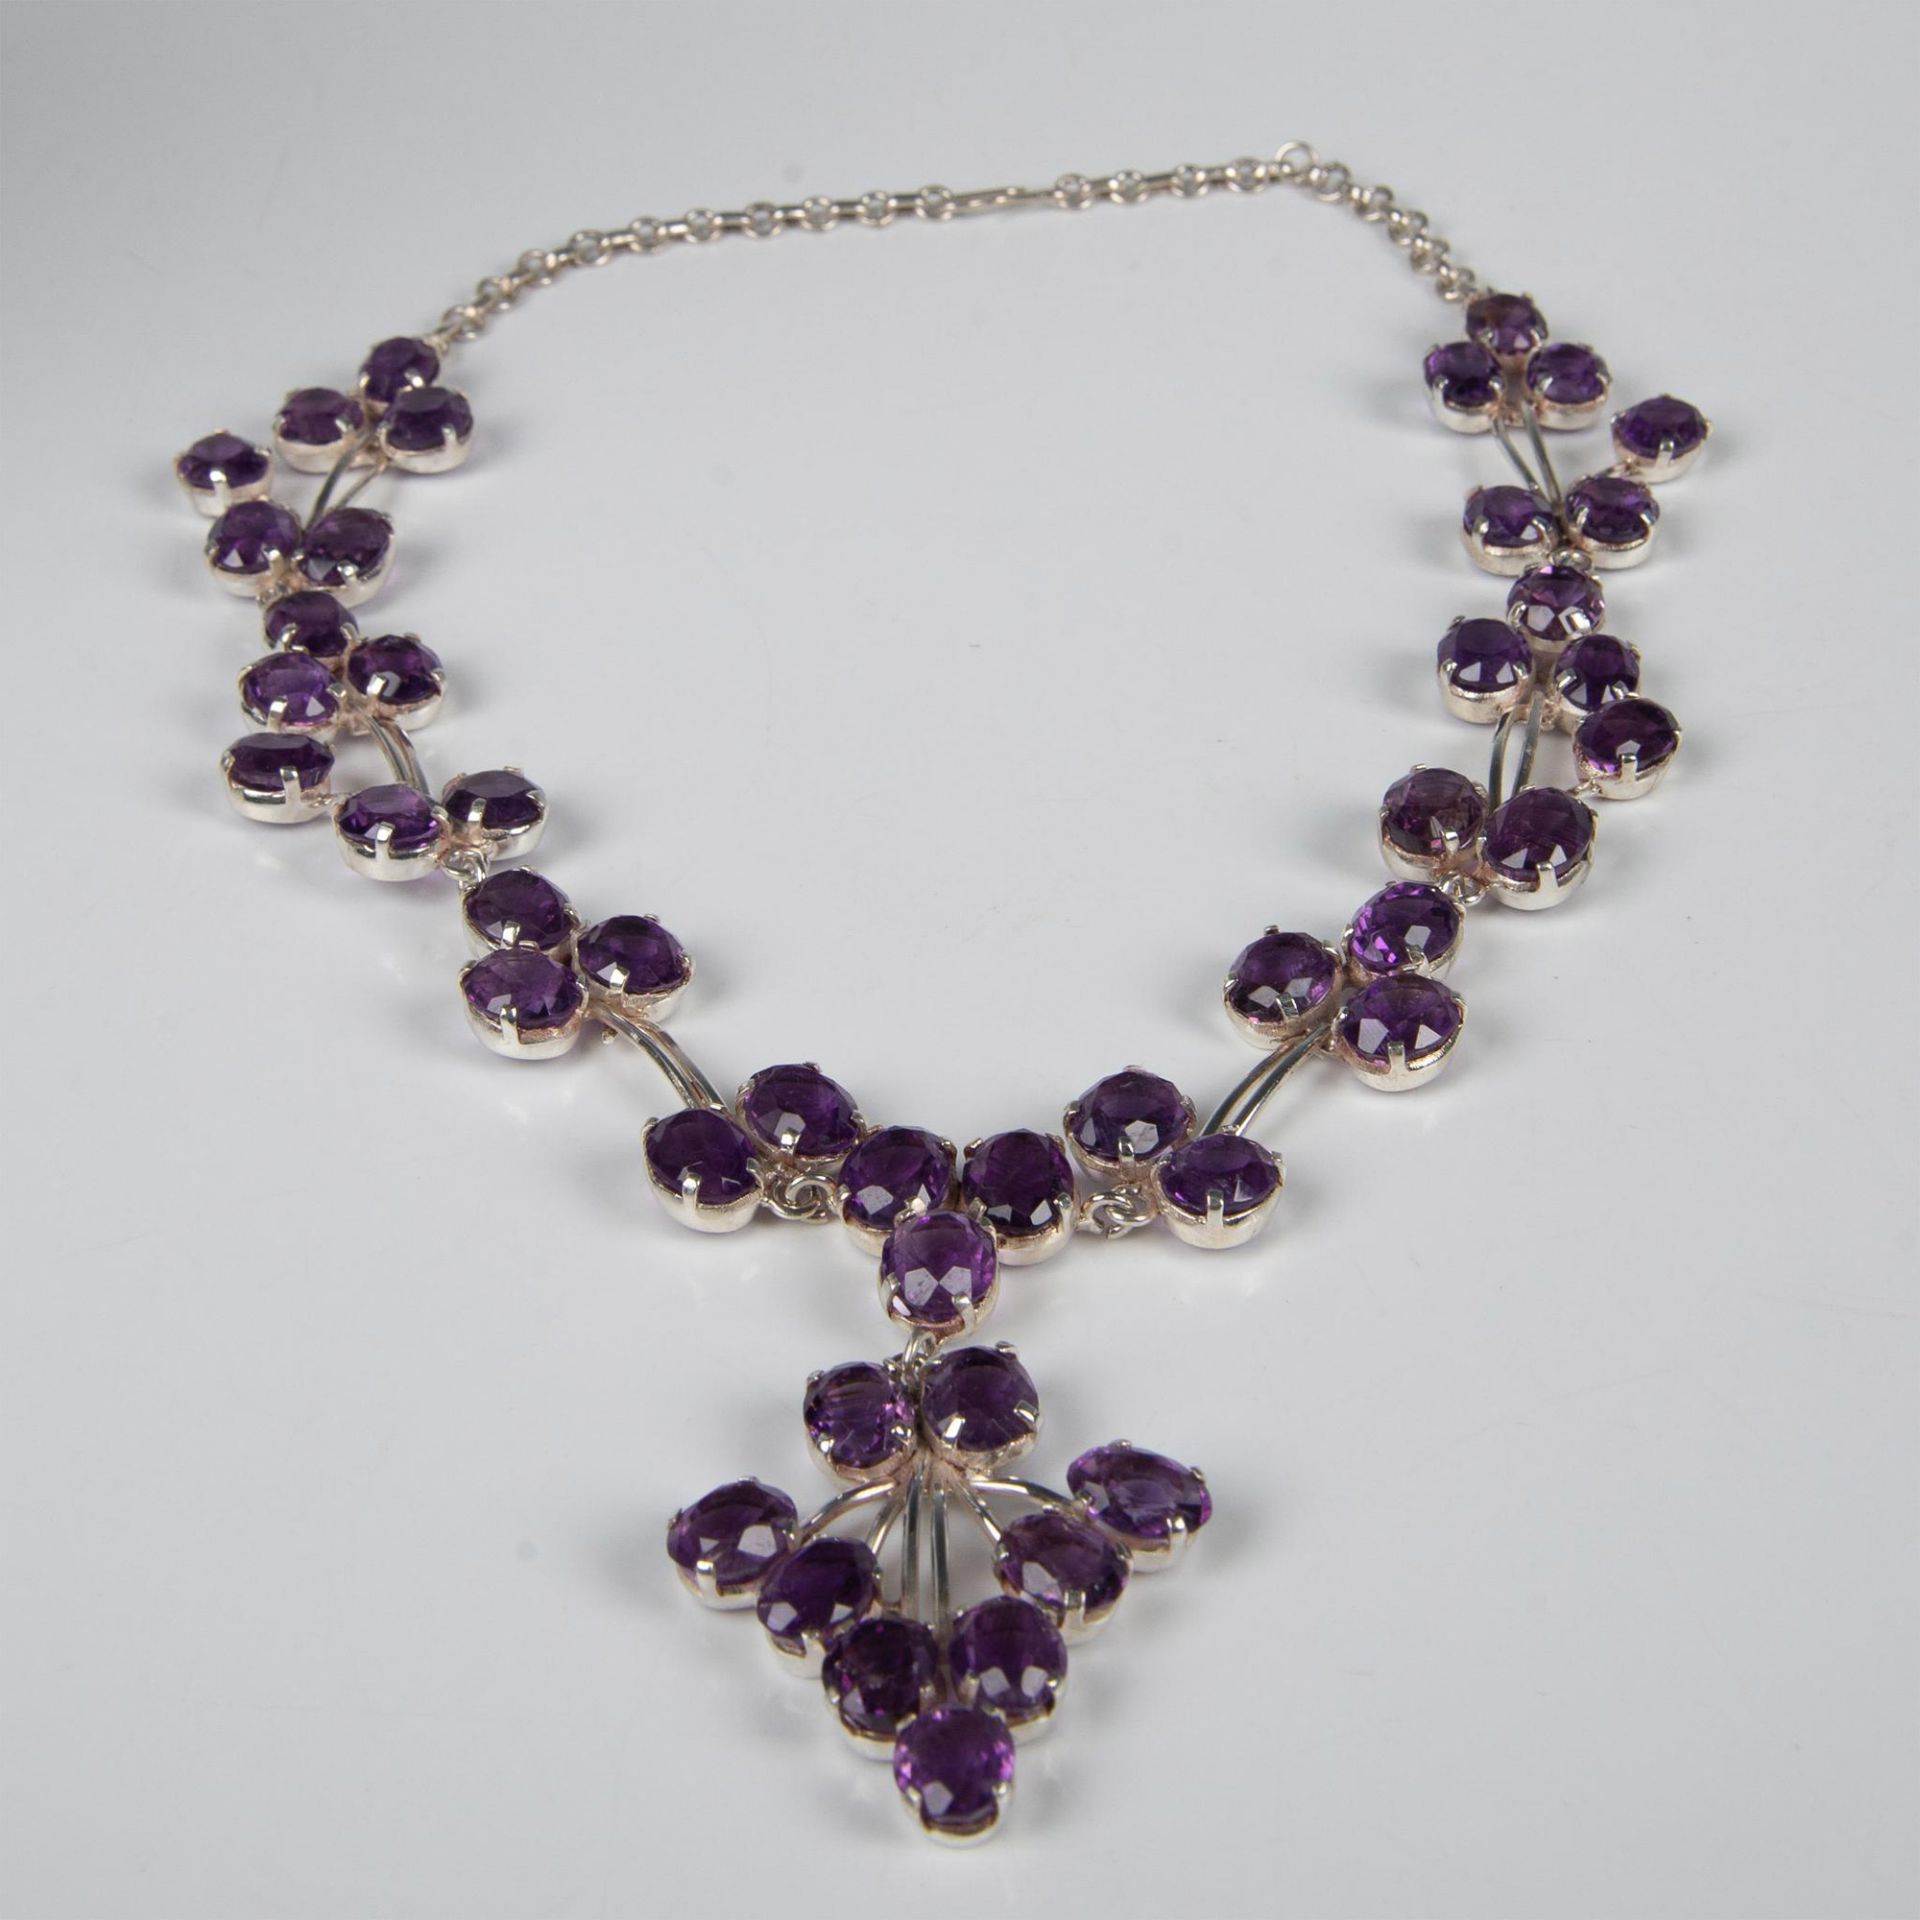 Exquisite Sterling Silver & Lab Amethyst Statement Necklace - Image 5 of 12